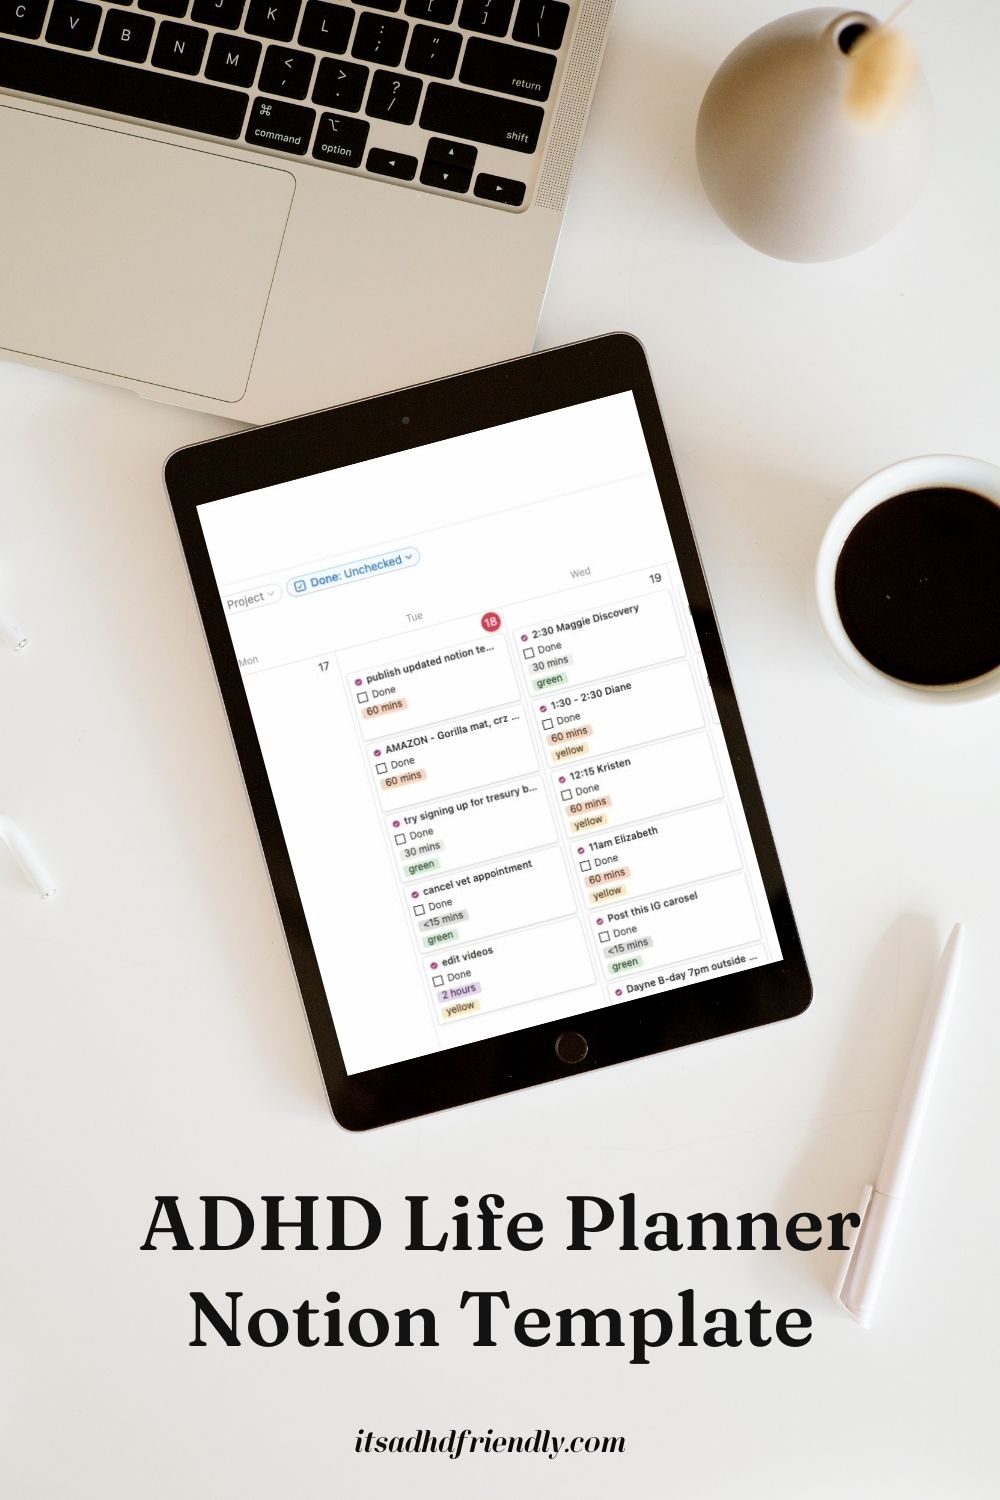 Notion template for adhd